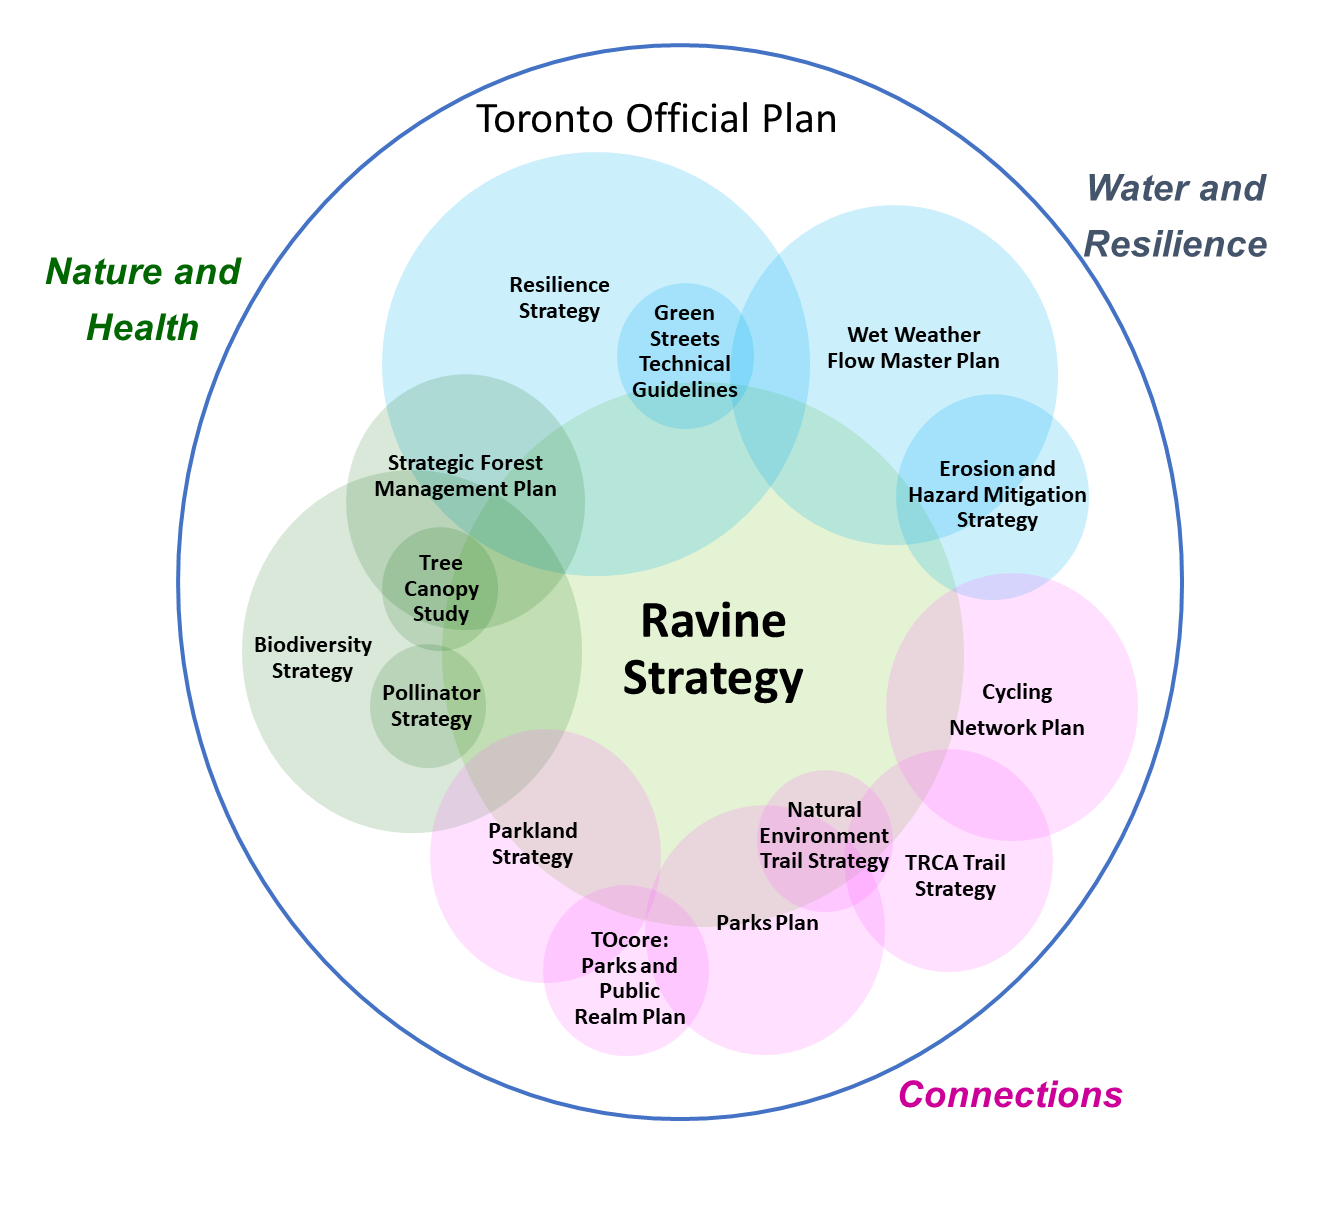 Venn diagram showing how the Ravine Strategy overlaps with other City of Toronto strategies. All of the strategies fall within the Official Plan. The Ravine Strategy is in the center of the diagram touching all of the other strategies and plans. Shown in green are strategies related to nature and health: Strategic Forest Management Plan, Biodiversity Strategy, Tree Canopy Study, and Pollinator Strategy. Shown in blue are strategies related to water and resilience to climate change: Resiliency Strategy, Wet Weather Flow Master Plan, Erosion and Hazard Mitigation Strategy, and Green Streets Technical Guidelines. Shown in pink are strategies related to connections: Parkland Strategy, Parks Plan, TOcore: Downtown Parks and Public Realm Plan, Natural Environment Trail Strategy, TRCA Trail Strategy, and Cycling Network Plan